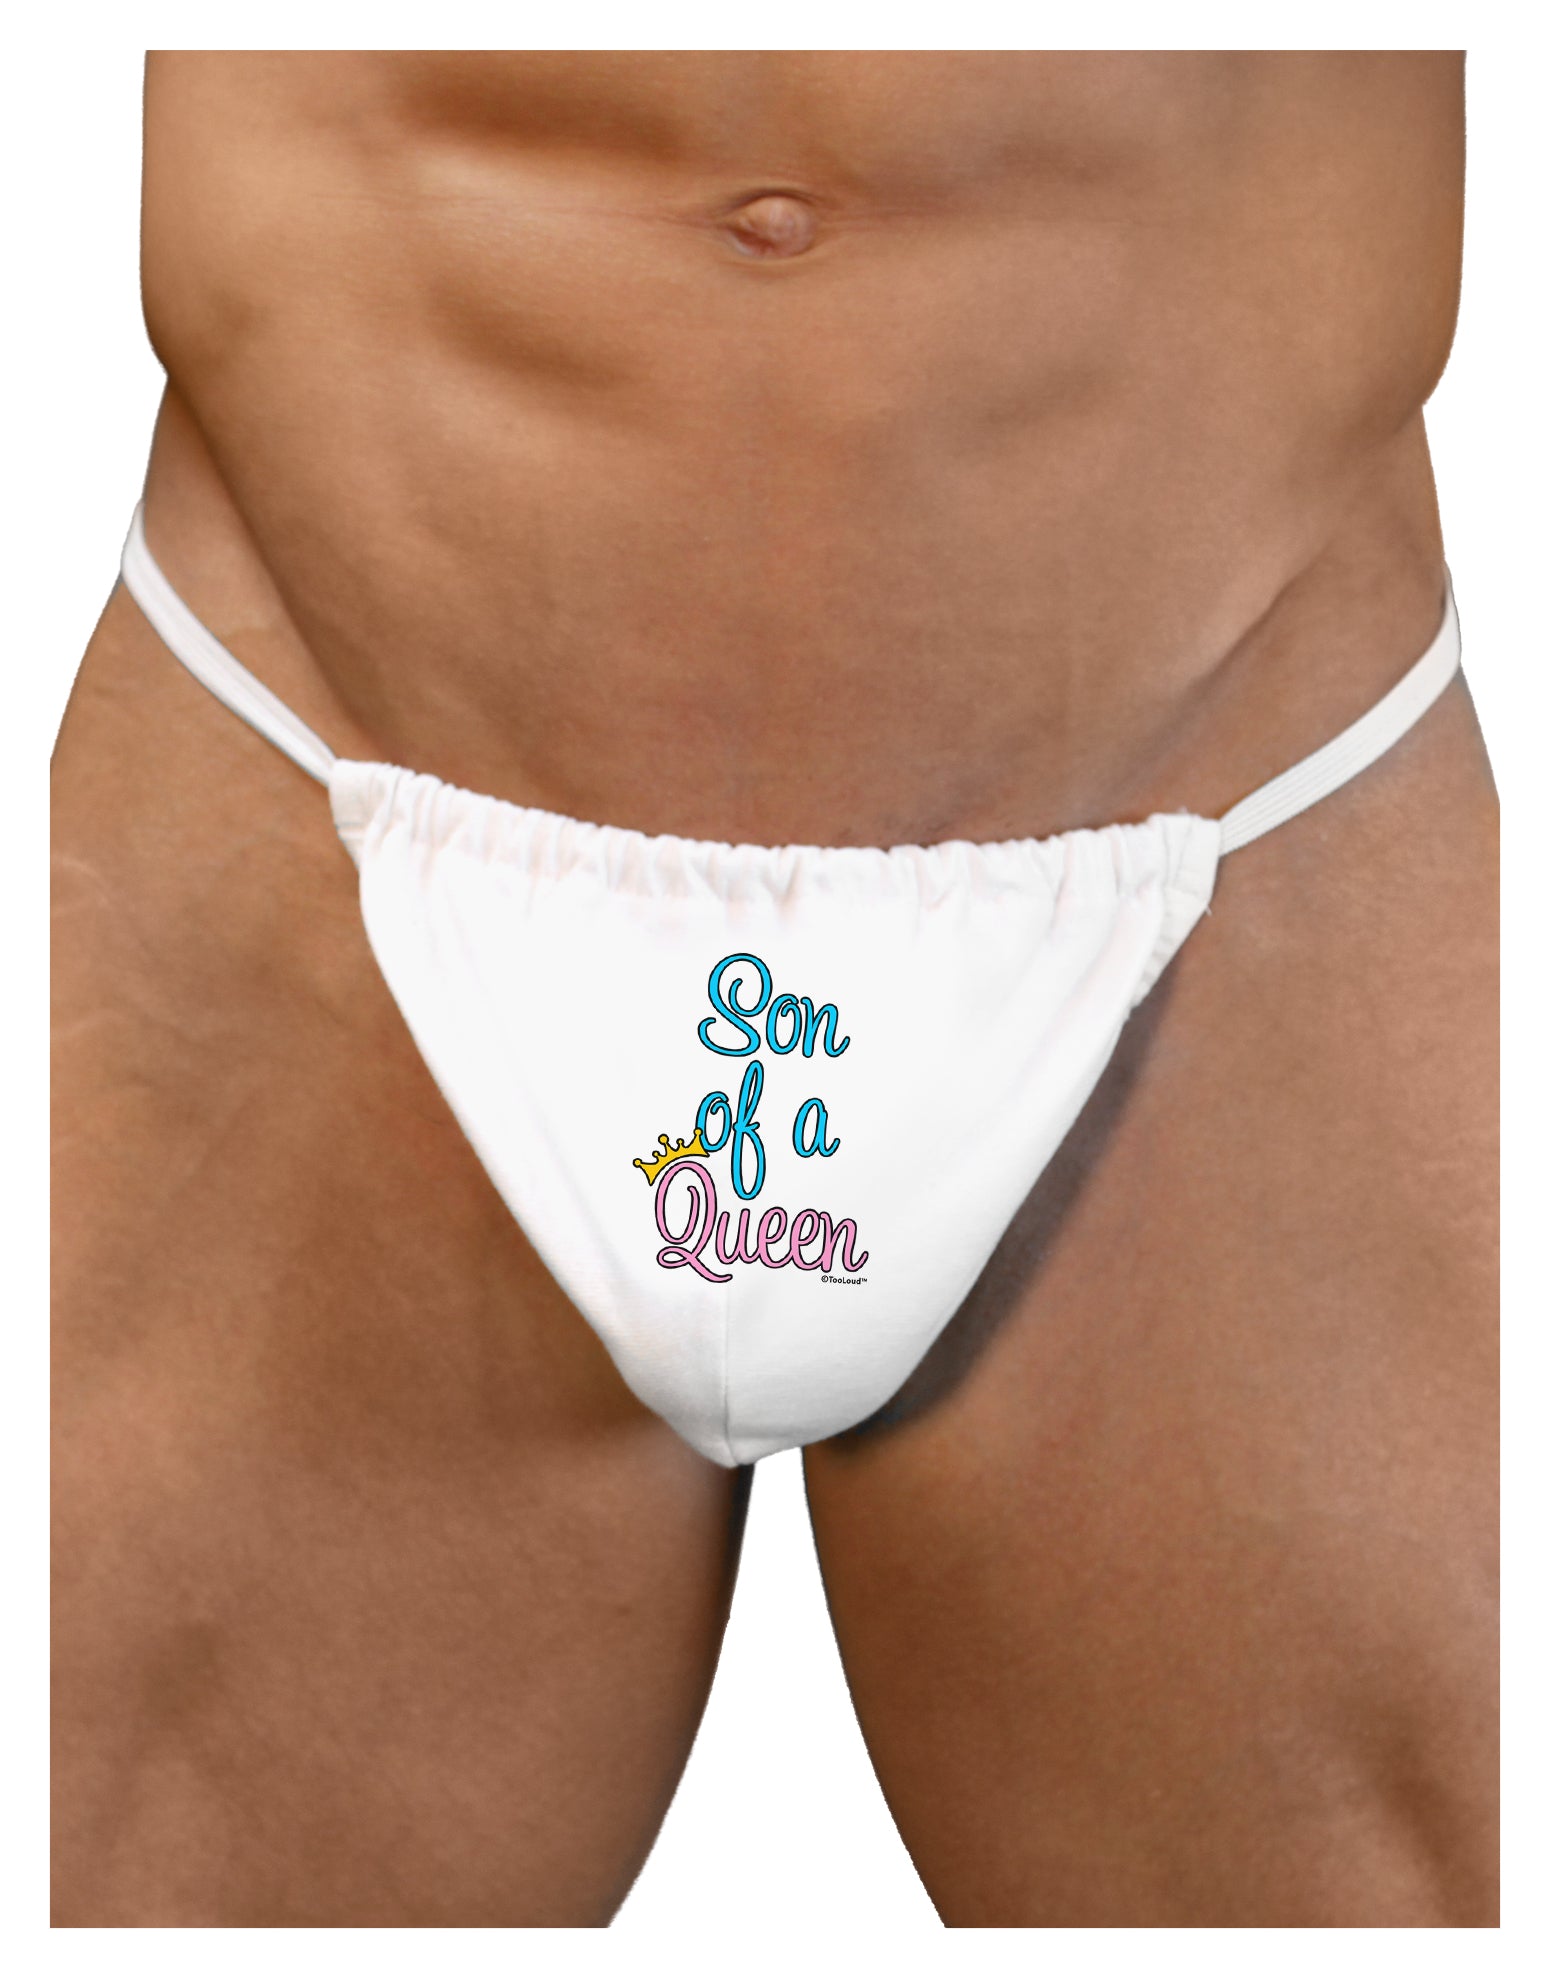 Son of a Queen - Matching Mom and Son Design Mens G-String Underwear b -  Davson Sales